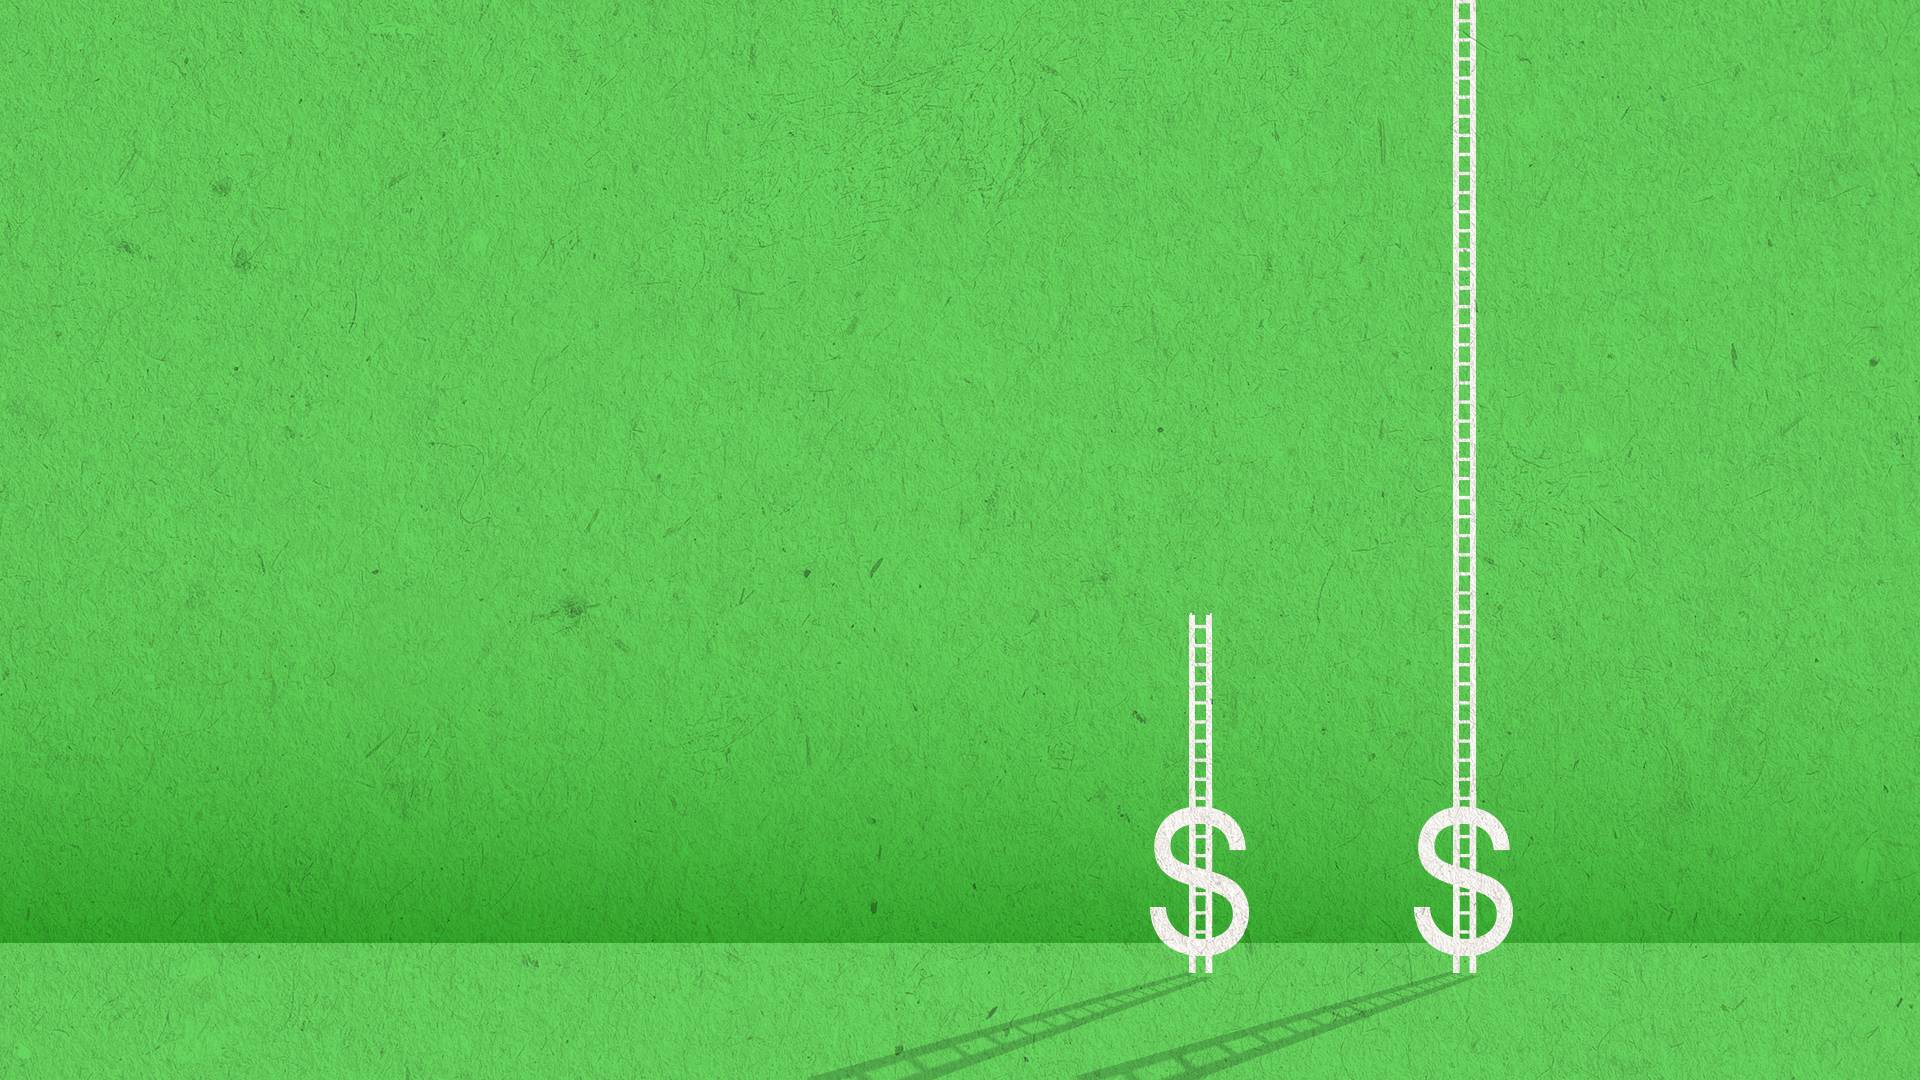 2 dollar signs on a green background with unequal ladders